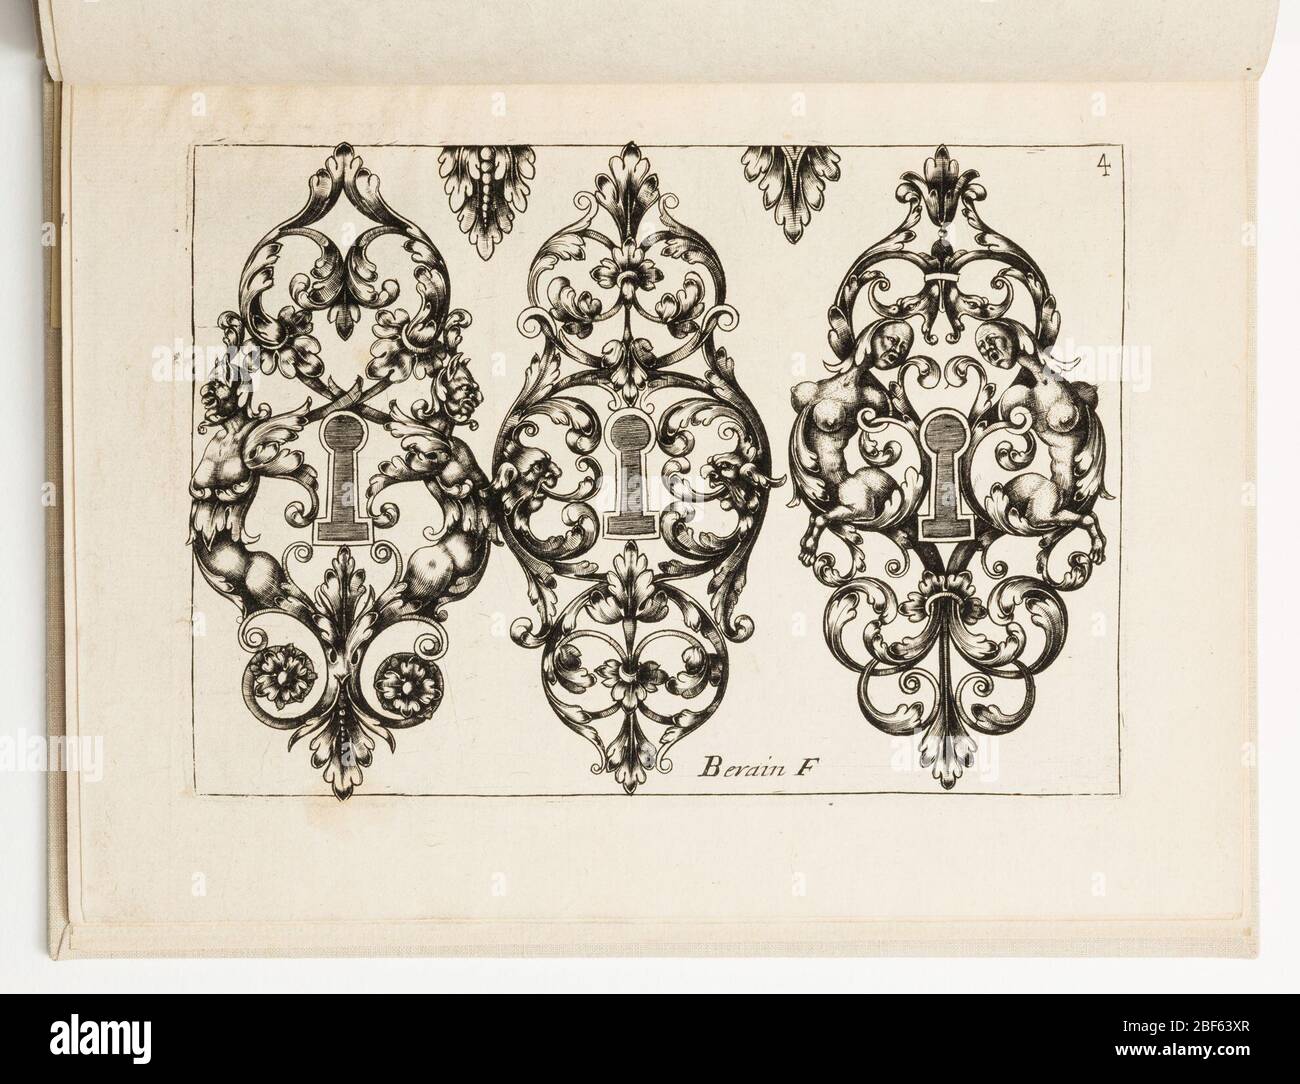 Plate 4 from Diverses pices de serruriers Various Designs for Locksmiths. Horizontal rectangle showing three escutcheon designs, each with interlacing leaves and opposing fantastic figures. Stock Photo